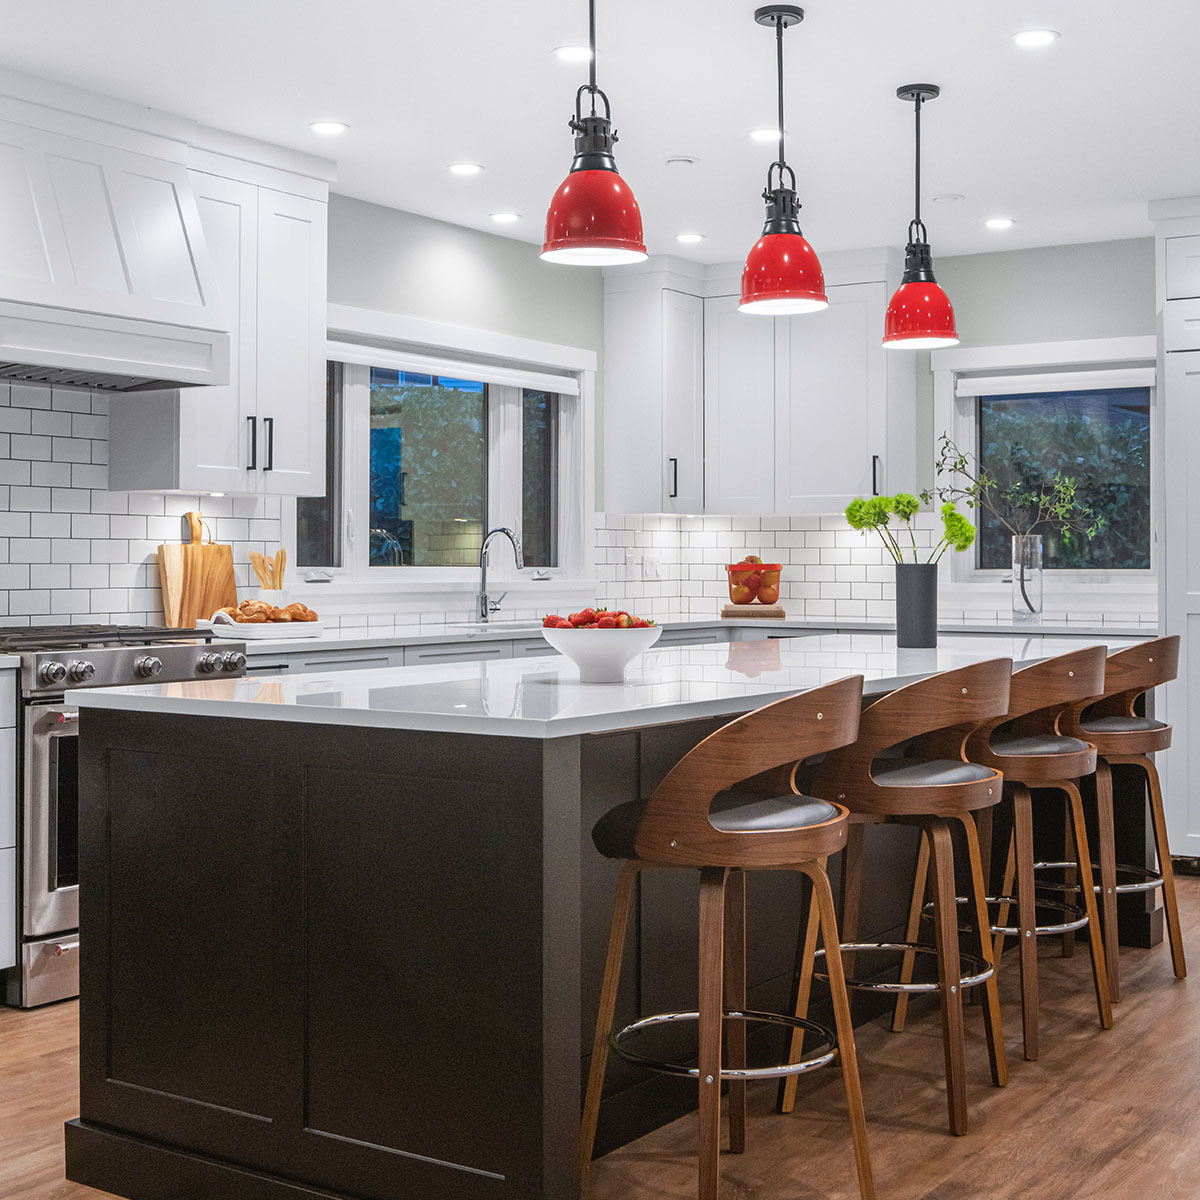 Modern kitchen with center island and red pendant lights.